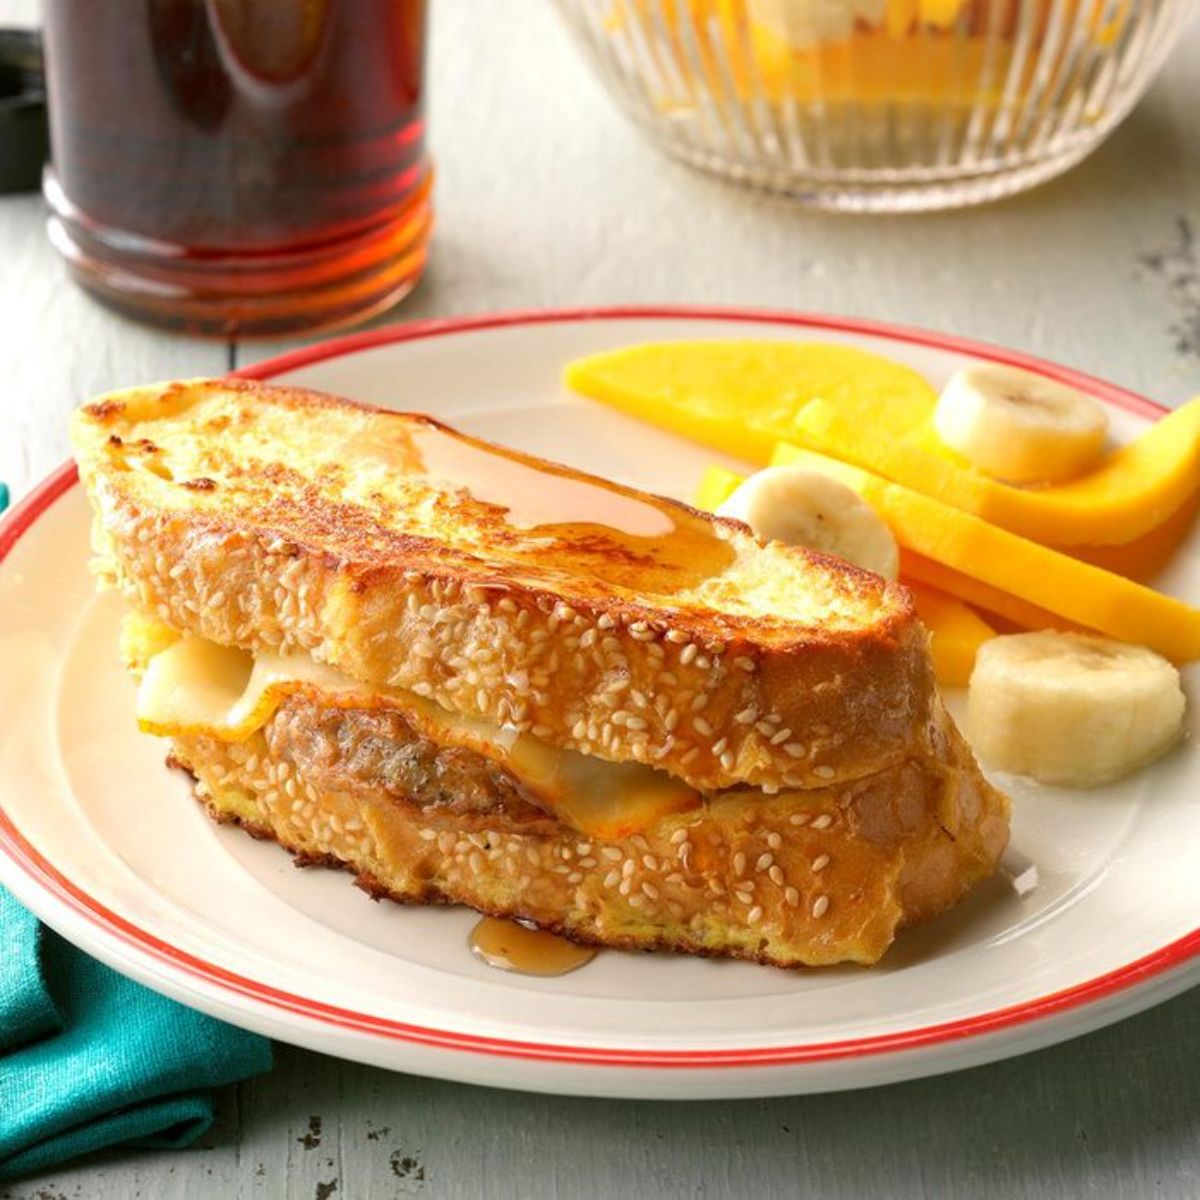 Sausage stuffed french toast on a white-red plate.